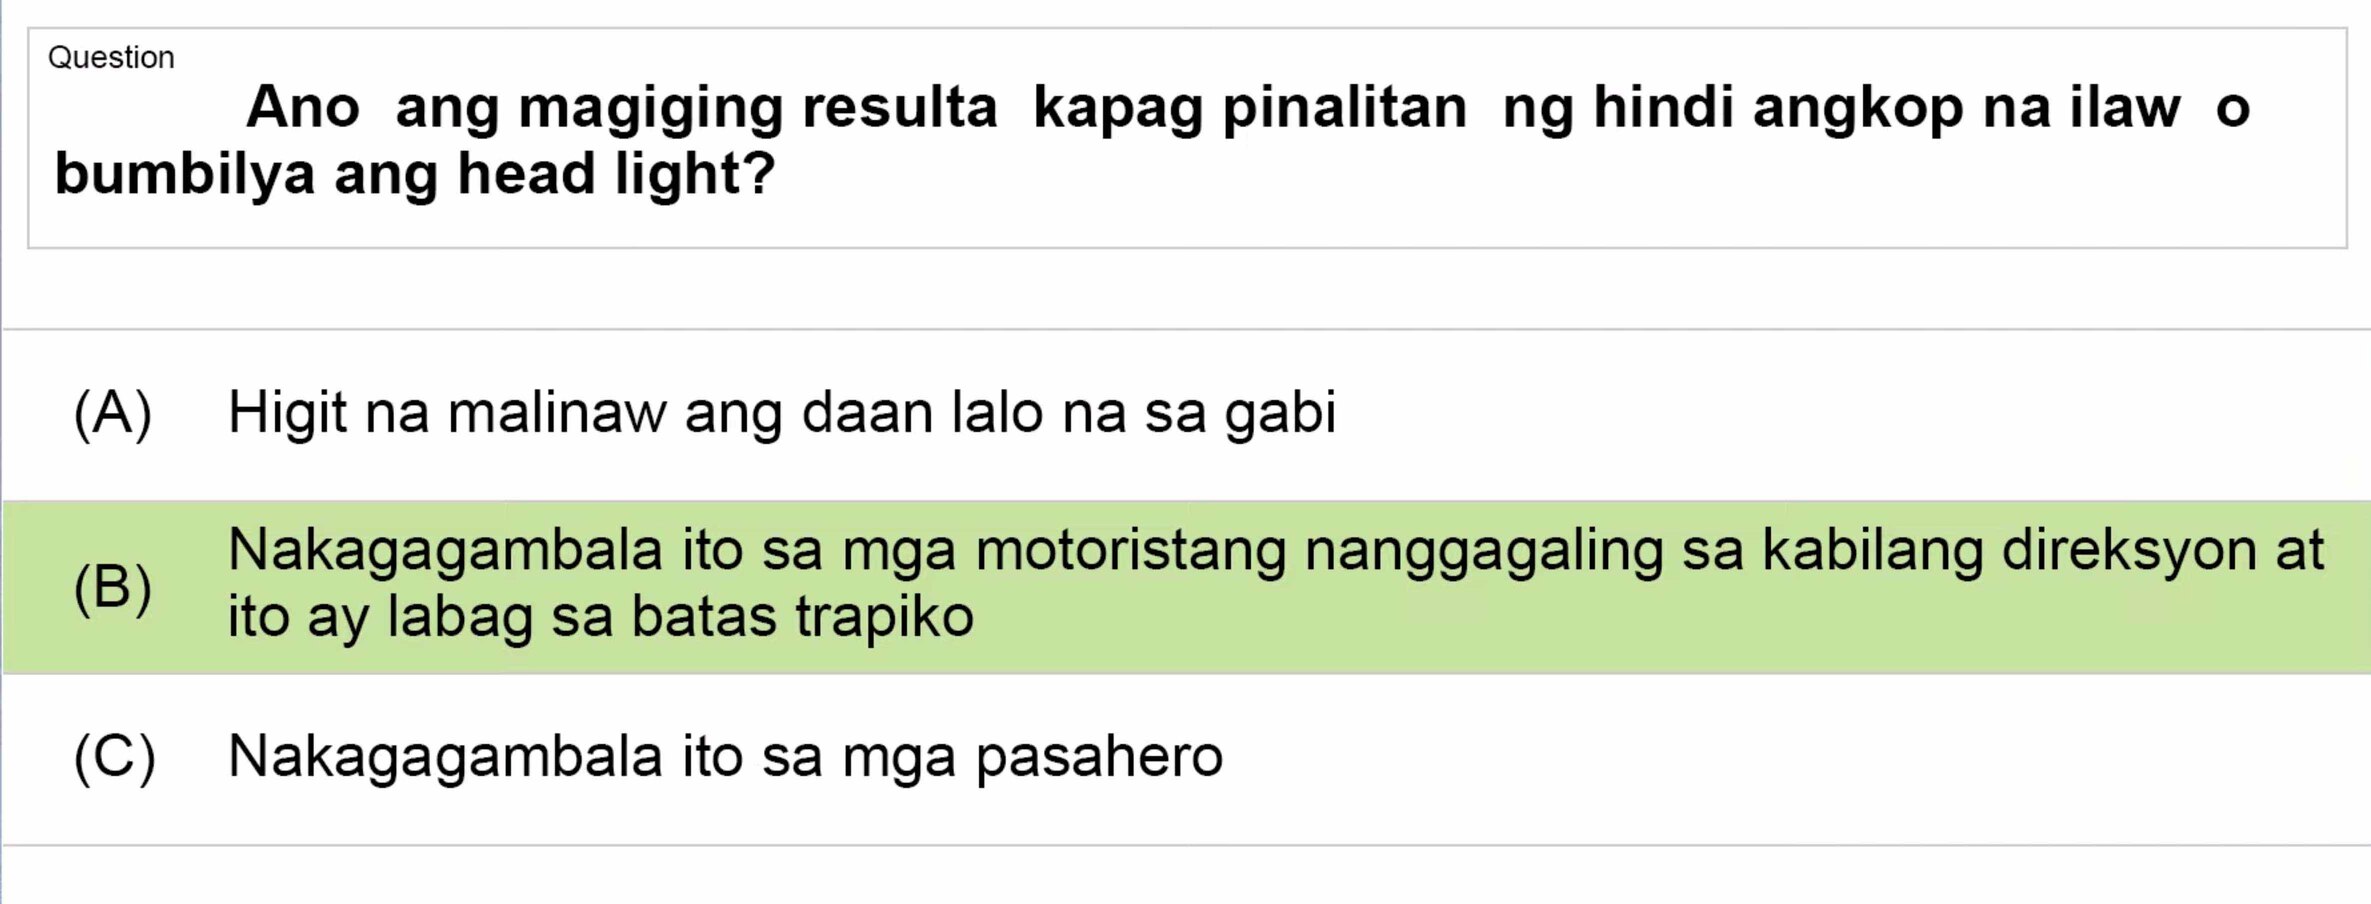 LTO Tagalog non professional exam reviewer light vehicle 2 (11)